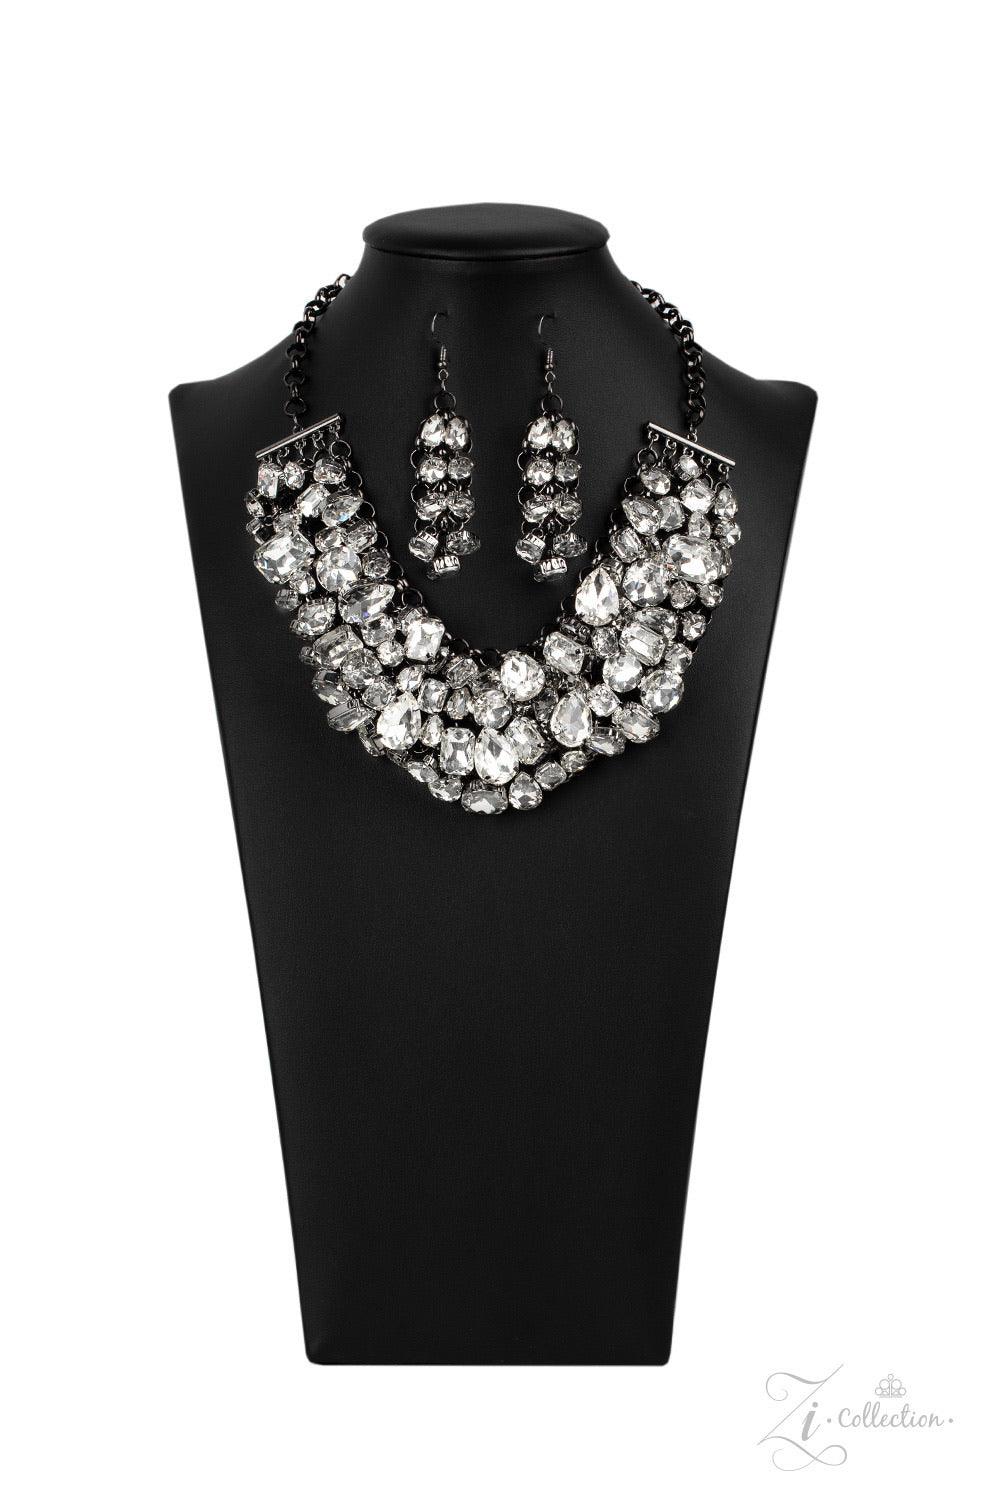 Paparazzi Accessories Ambitious 💗💗ZiCollection $25💗💗 A modern mashup of round, teardrop, and emerald cut white rhinestones link into jam-packed rows of jaw-dropping radiance. Attached to an interconnected gunmetal mesh backdrop, the clustered fringe f